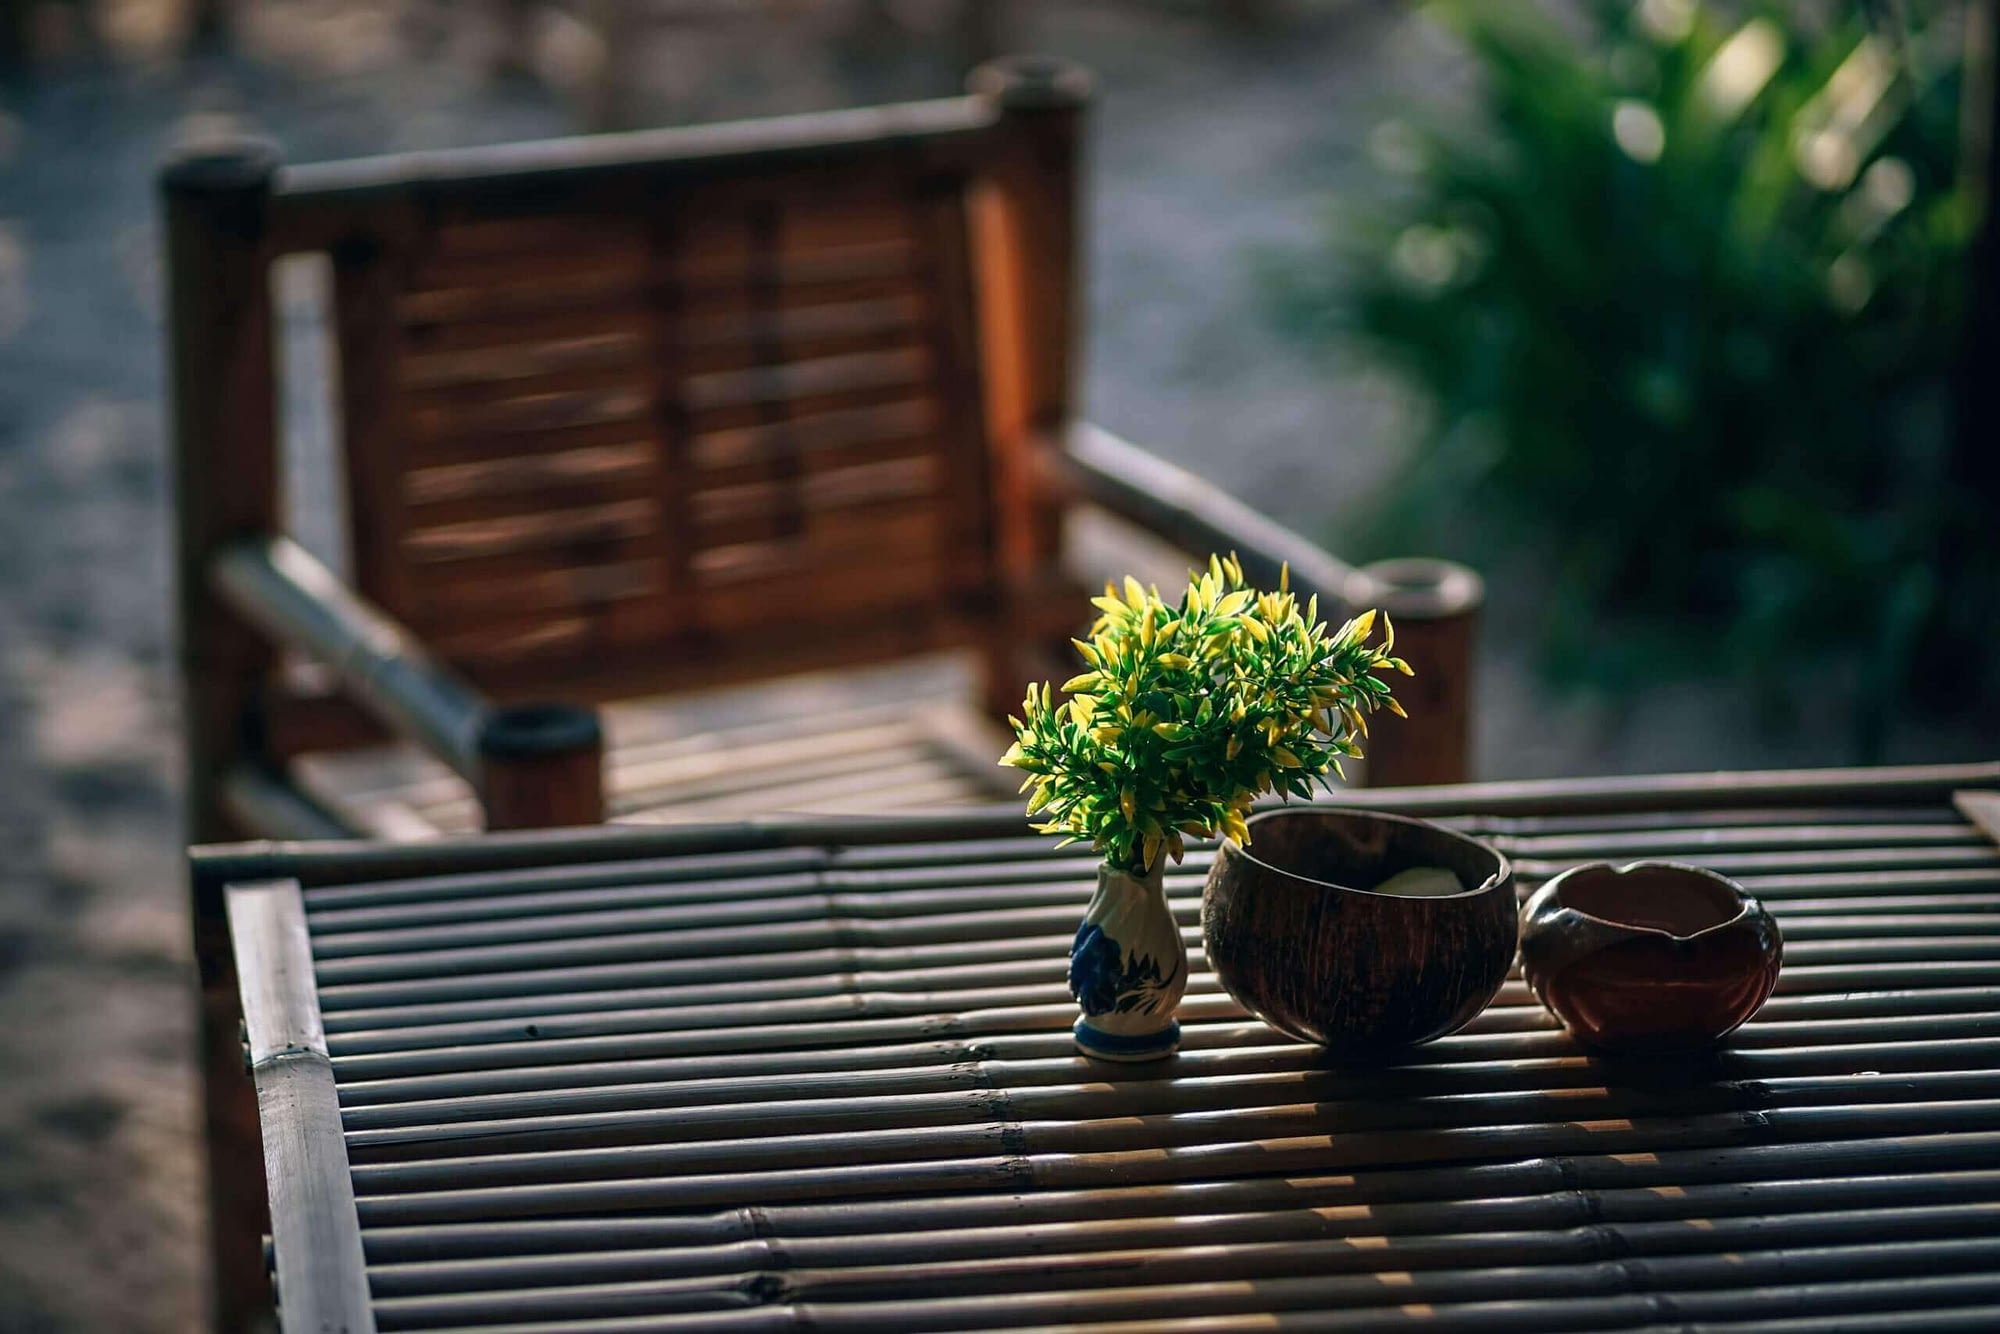 Green Leafed Plant on Table